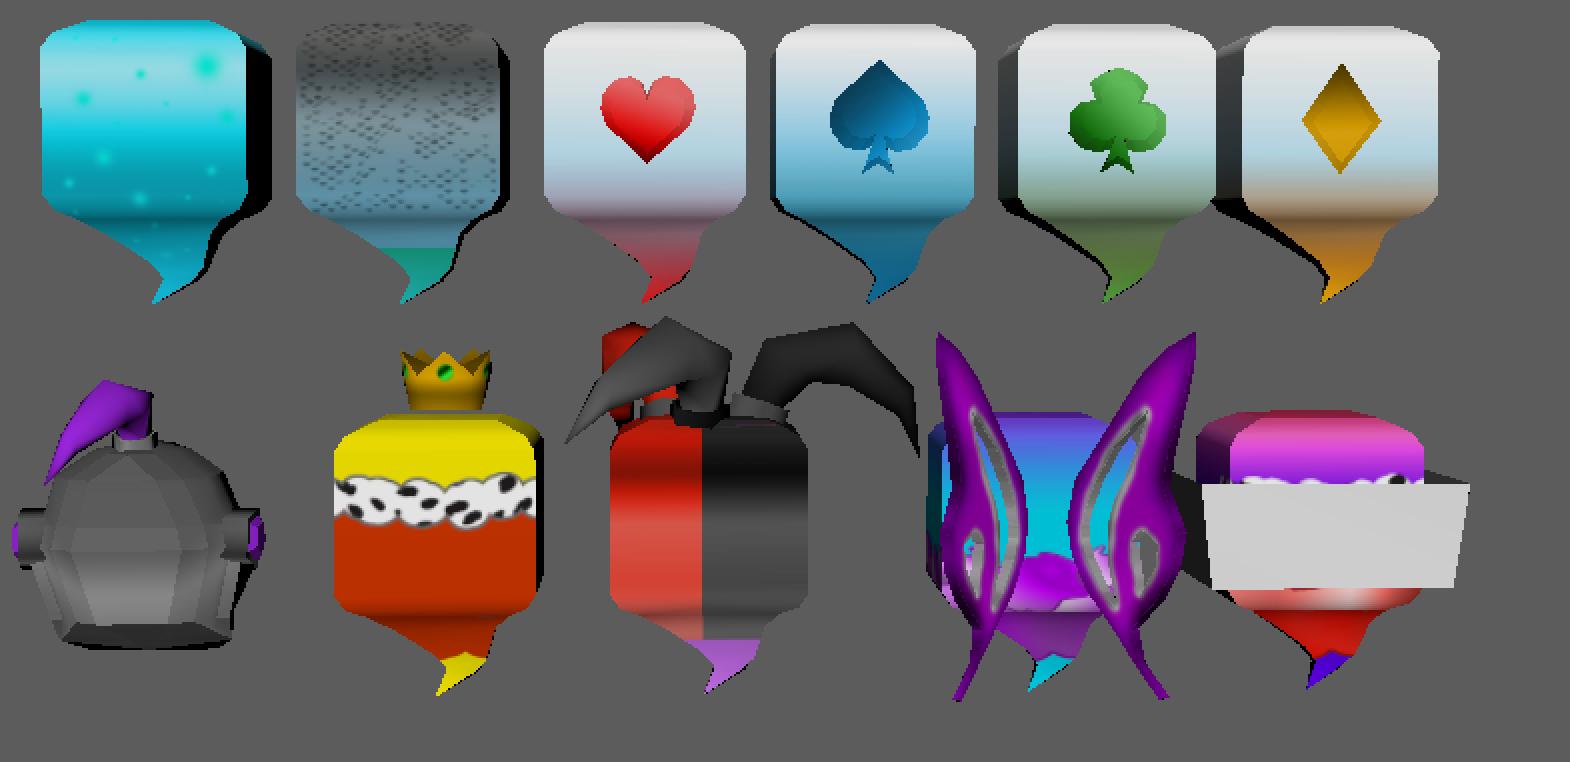 Makkiemon On Twitter A New Set Of Pets I Made For The Kingdom Pet Crate In Ghost Simulator They Just Came Out On The Game Today Go Play Robloxdev Roblox Https T Co Uvvixzseqq - roblox jellyfish simulator obby